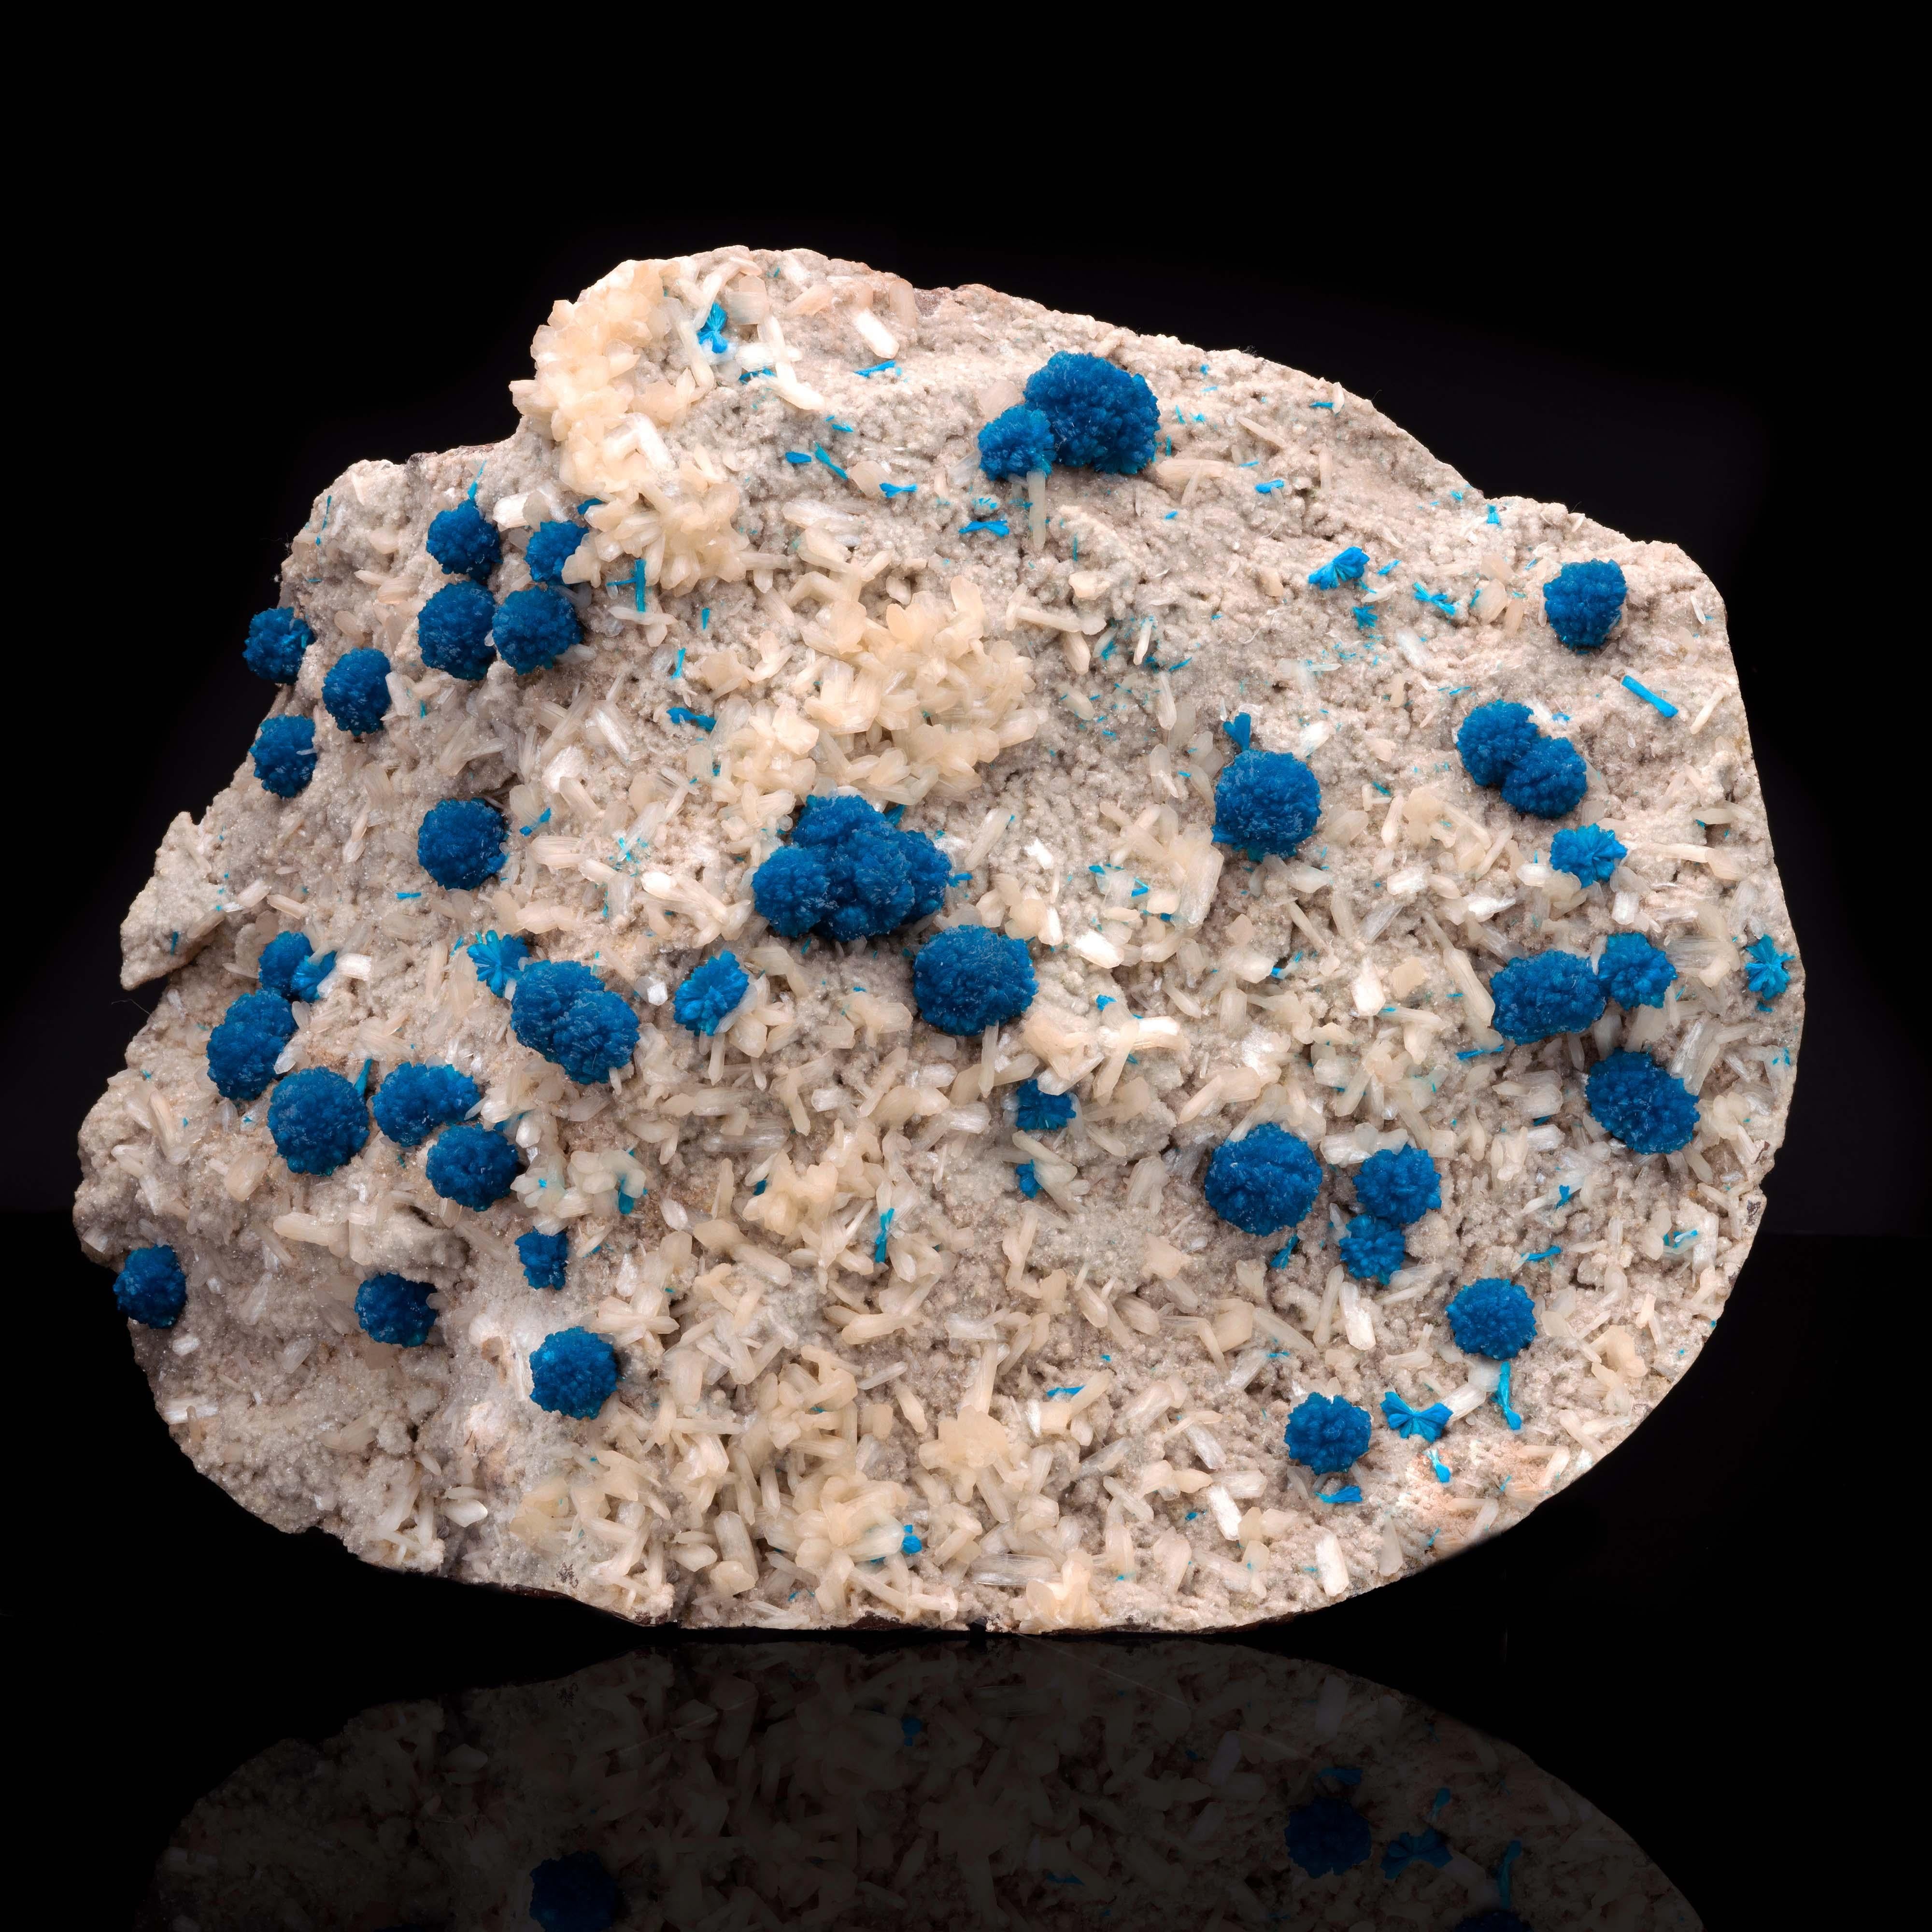 This is one of the largest and finest plates to come out of the famous and now-inactive mines of Wagholi in Pune, India. This 23.5 pound specimen offers abundant fully intact balls of gemmy, deeply pigmented blue cavansite dipped in druze on an